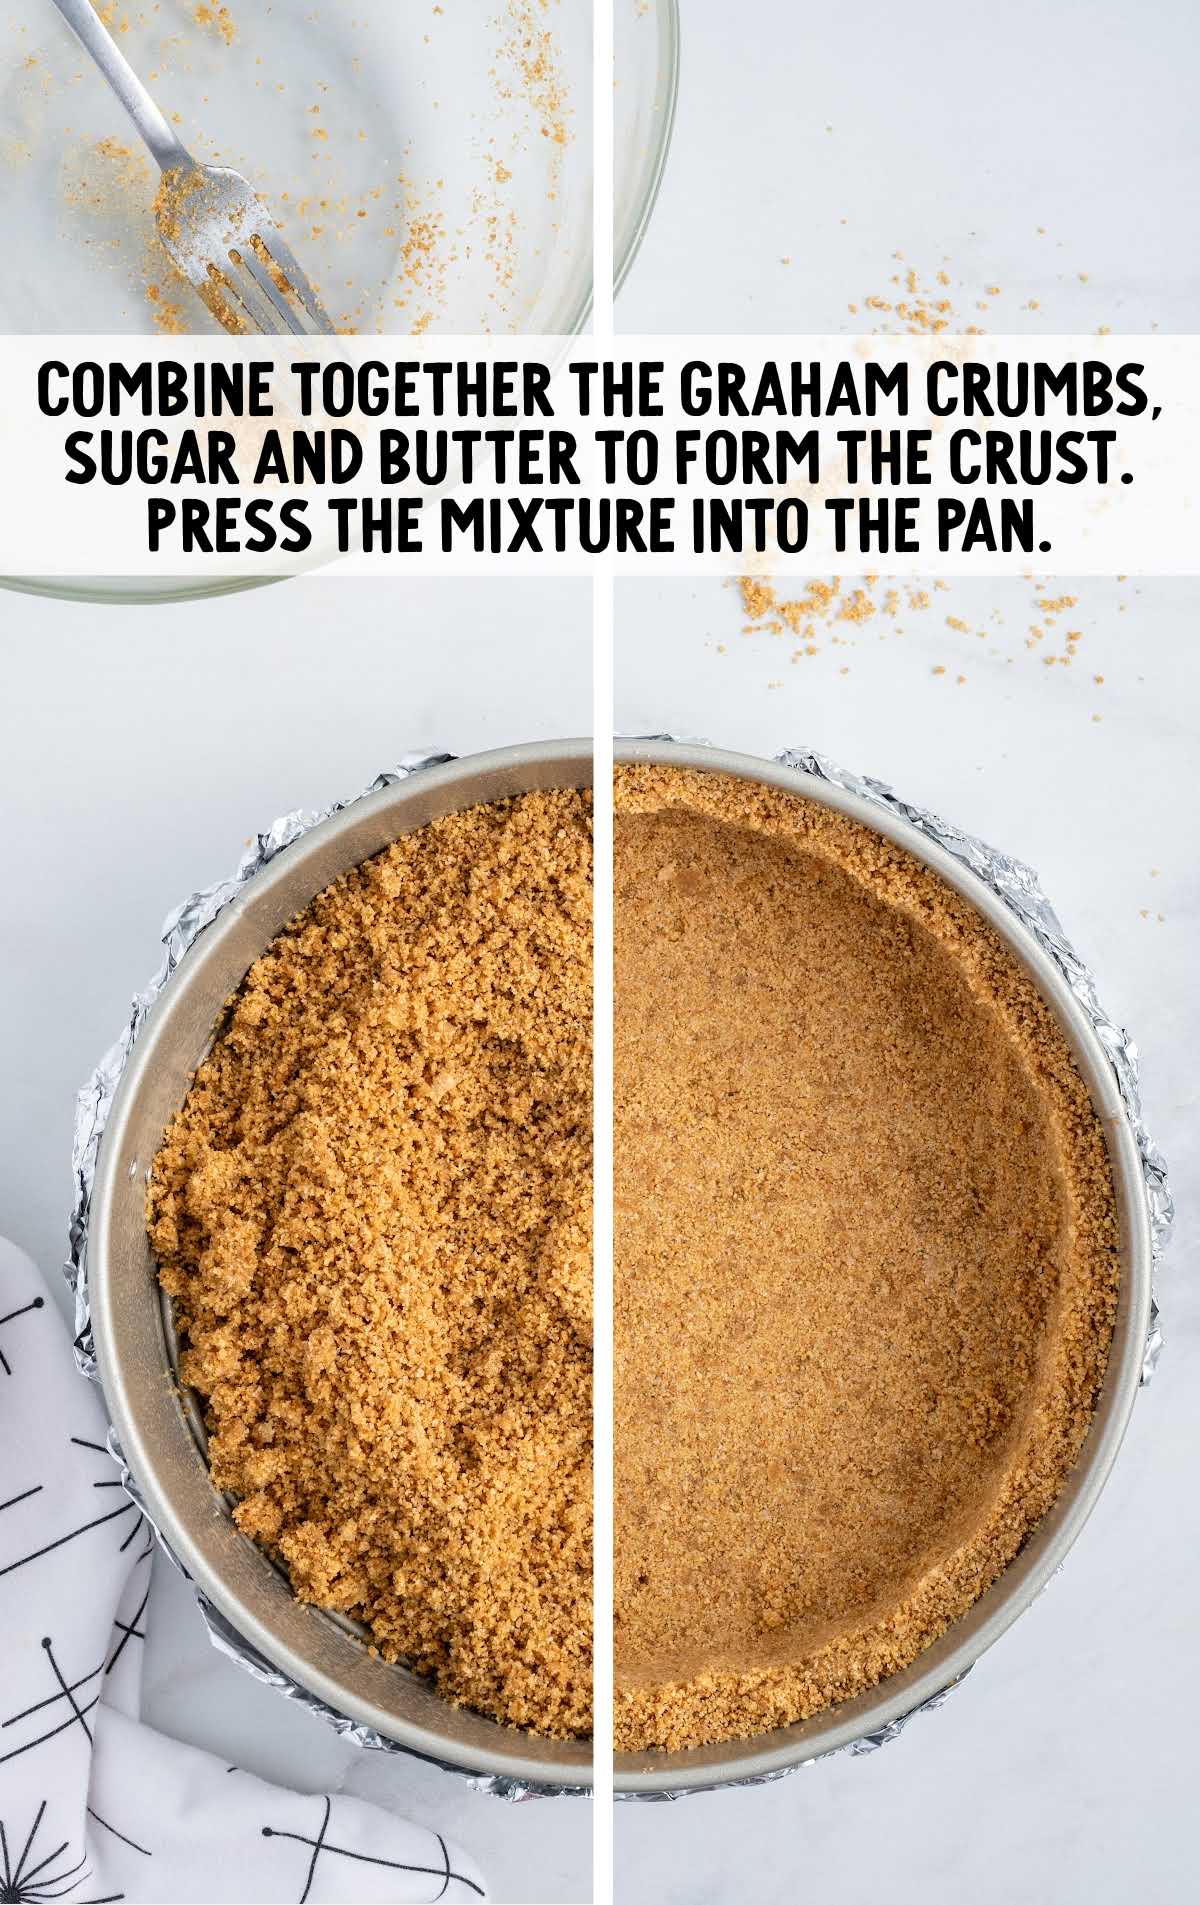 graham crumbs, sugar, and butter combined together in a pan